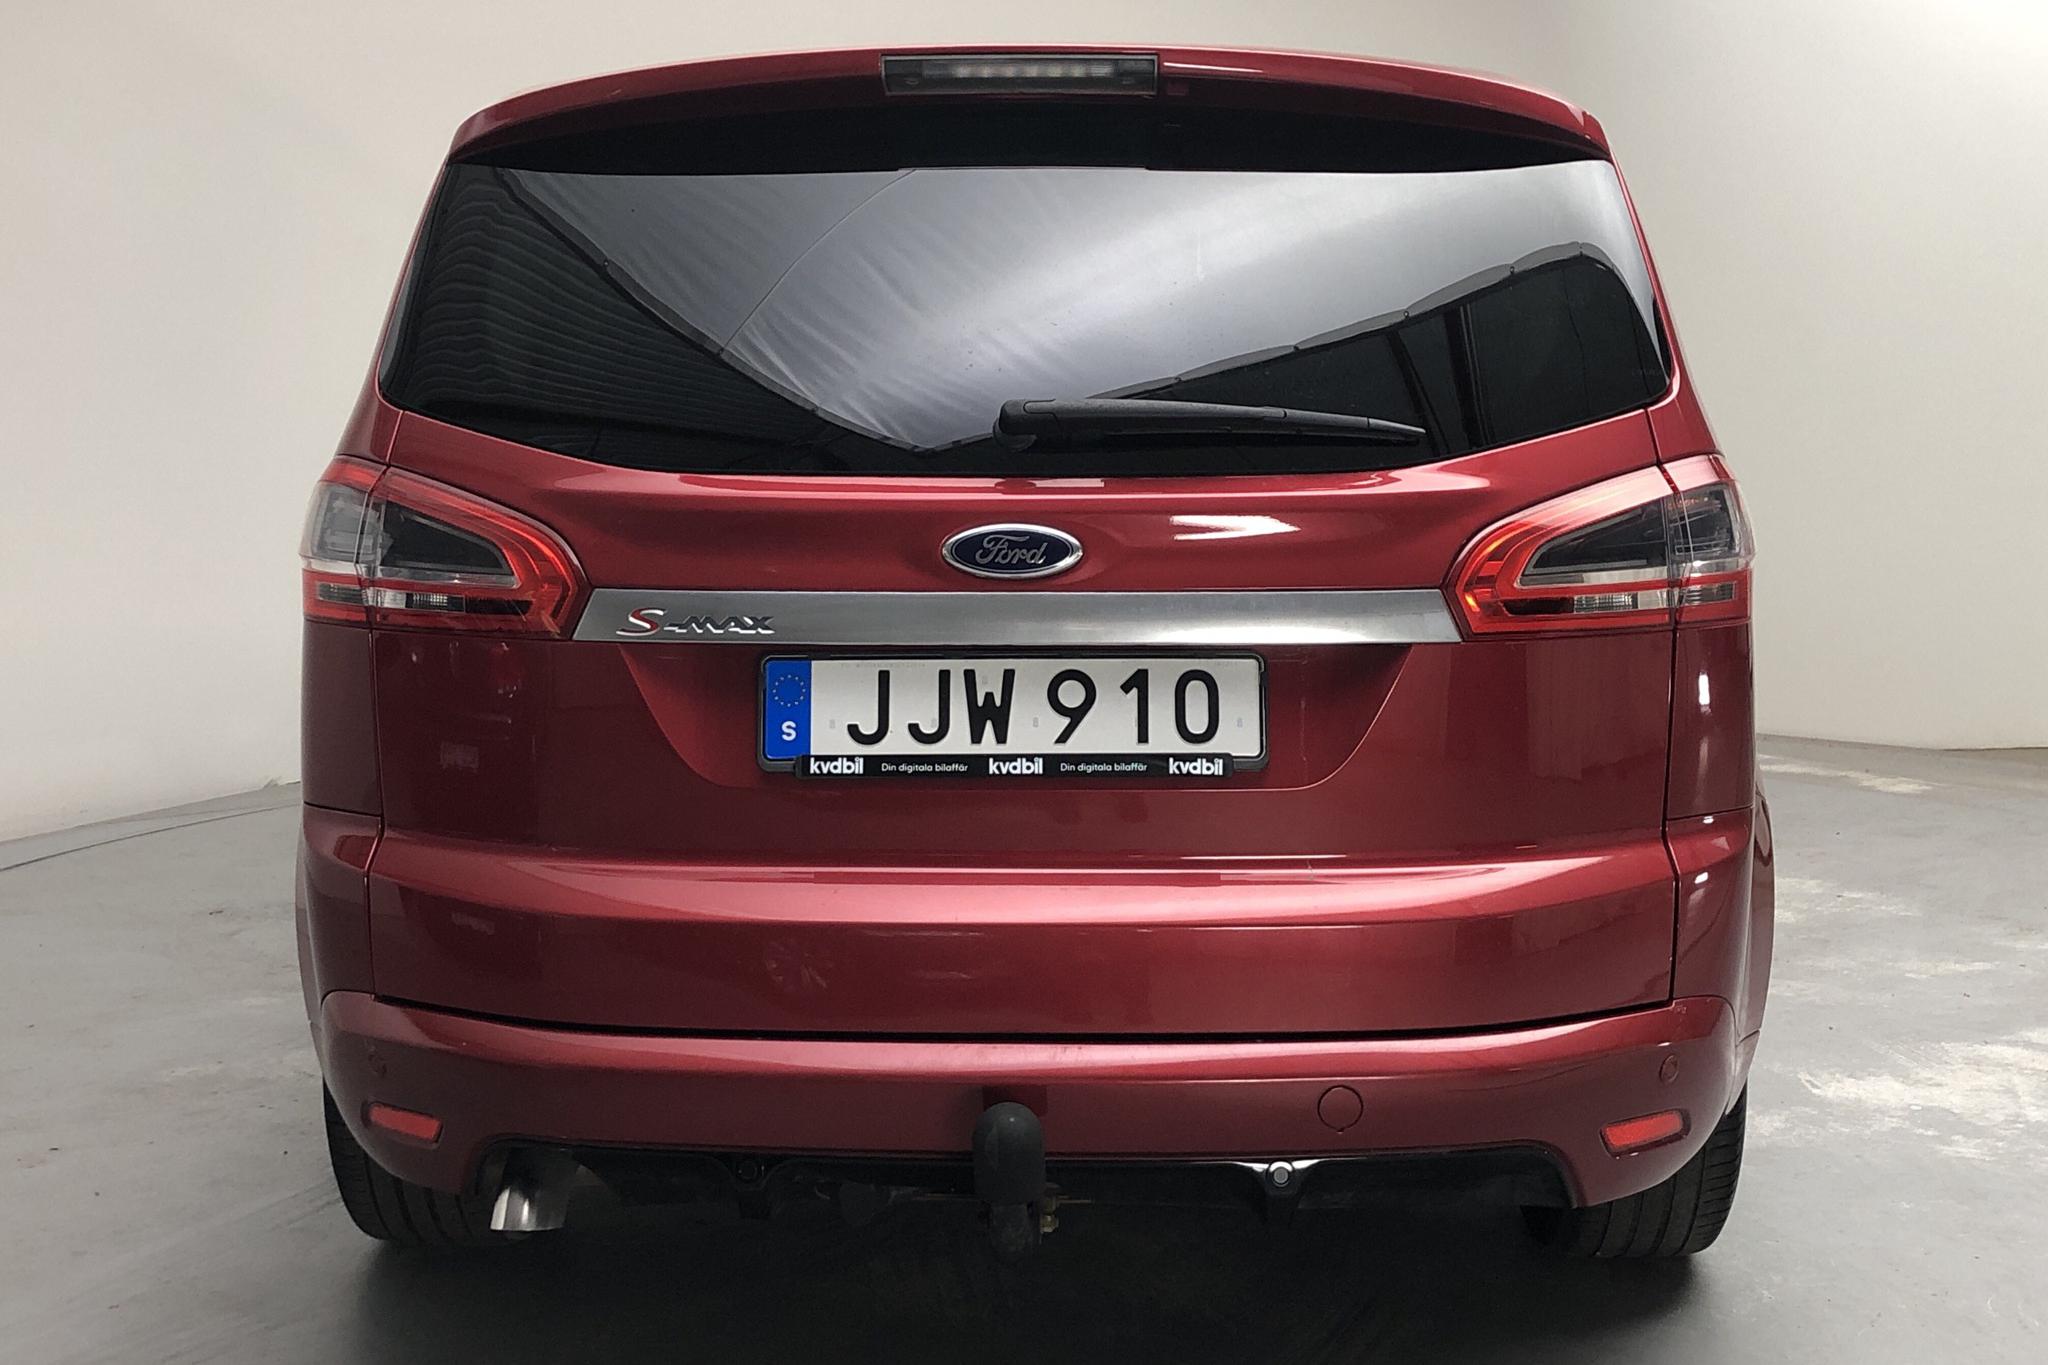 Ford S-MAX 2.0 Duratorq TDCi (140hk) - 117 400 km - Automatic - red - 2014